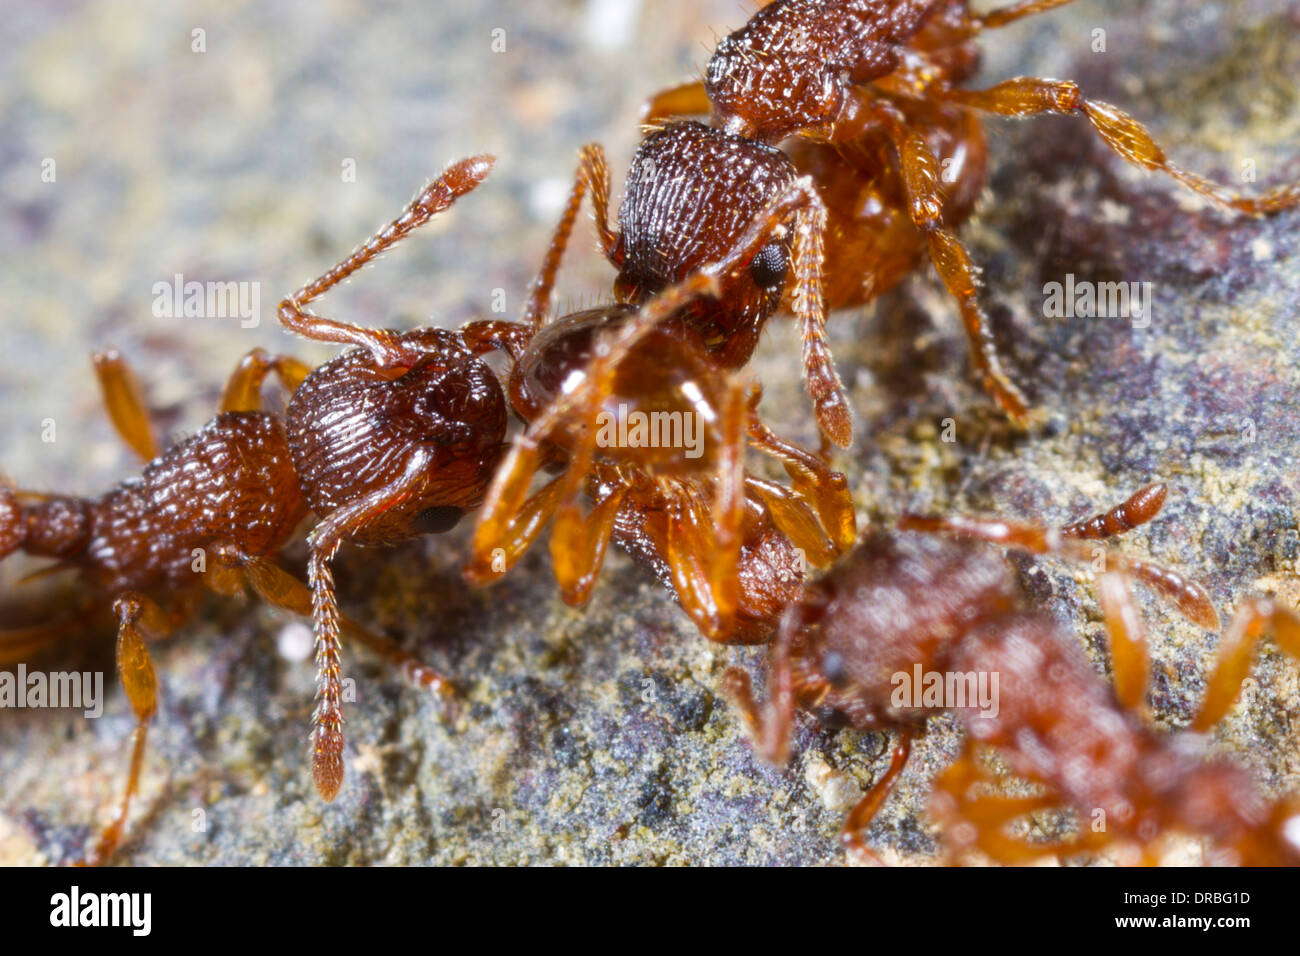 Worker ants of Myrmica sabuleti attacking and predating a worker of Myrmica scabrinodis. Powys, Wales. August. Stock Photo